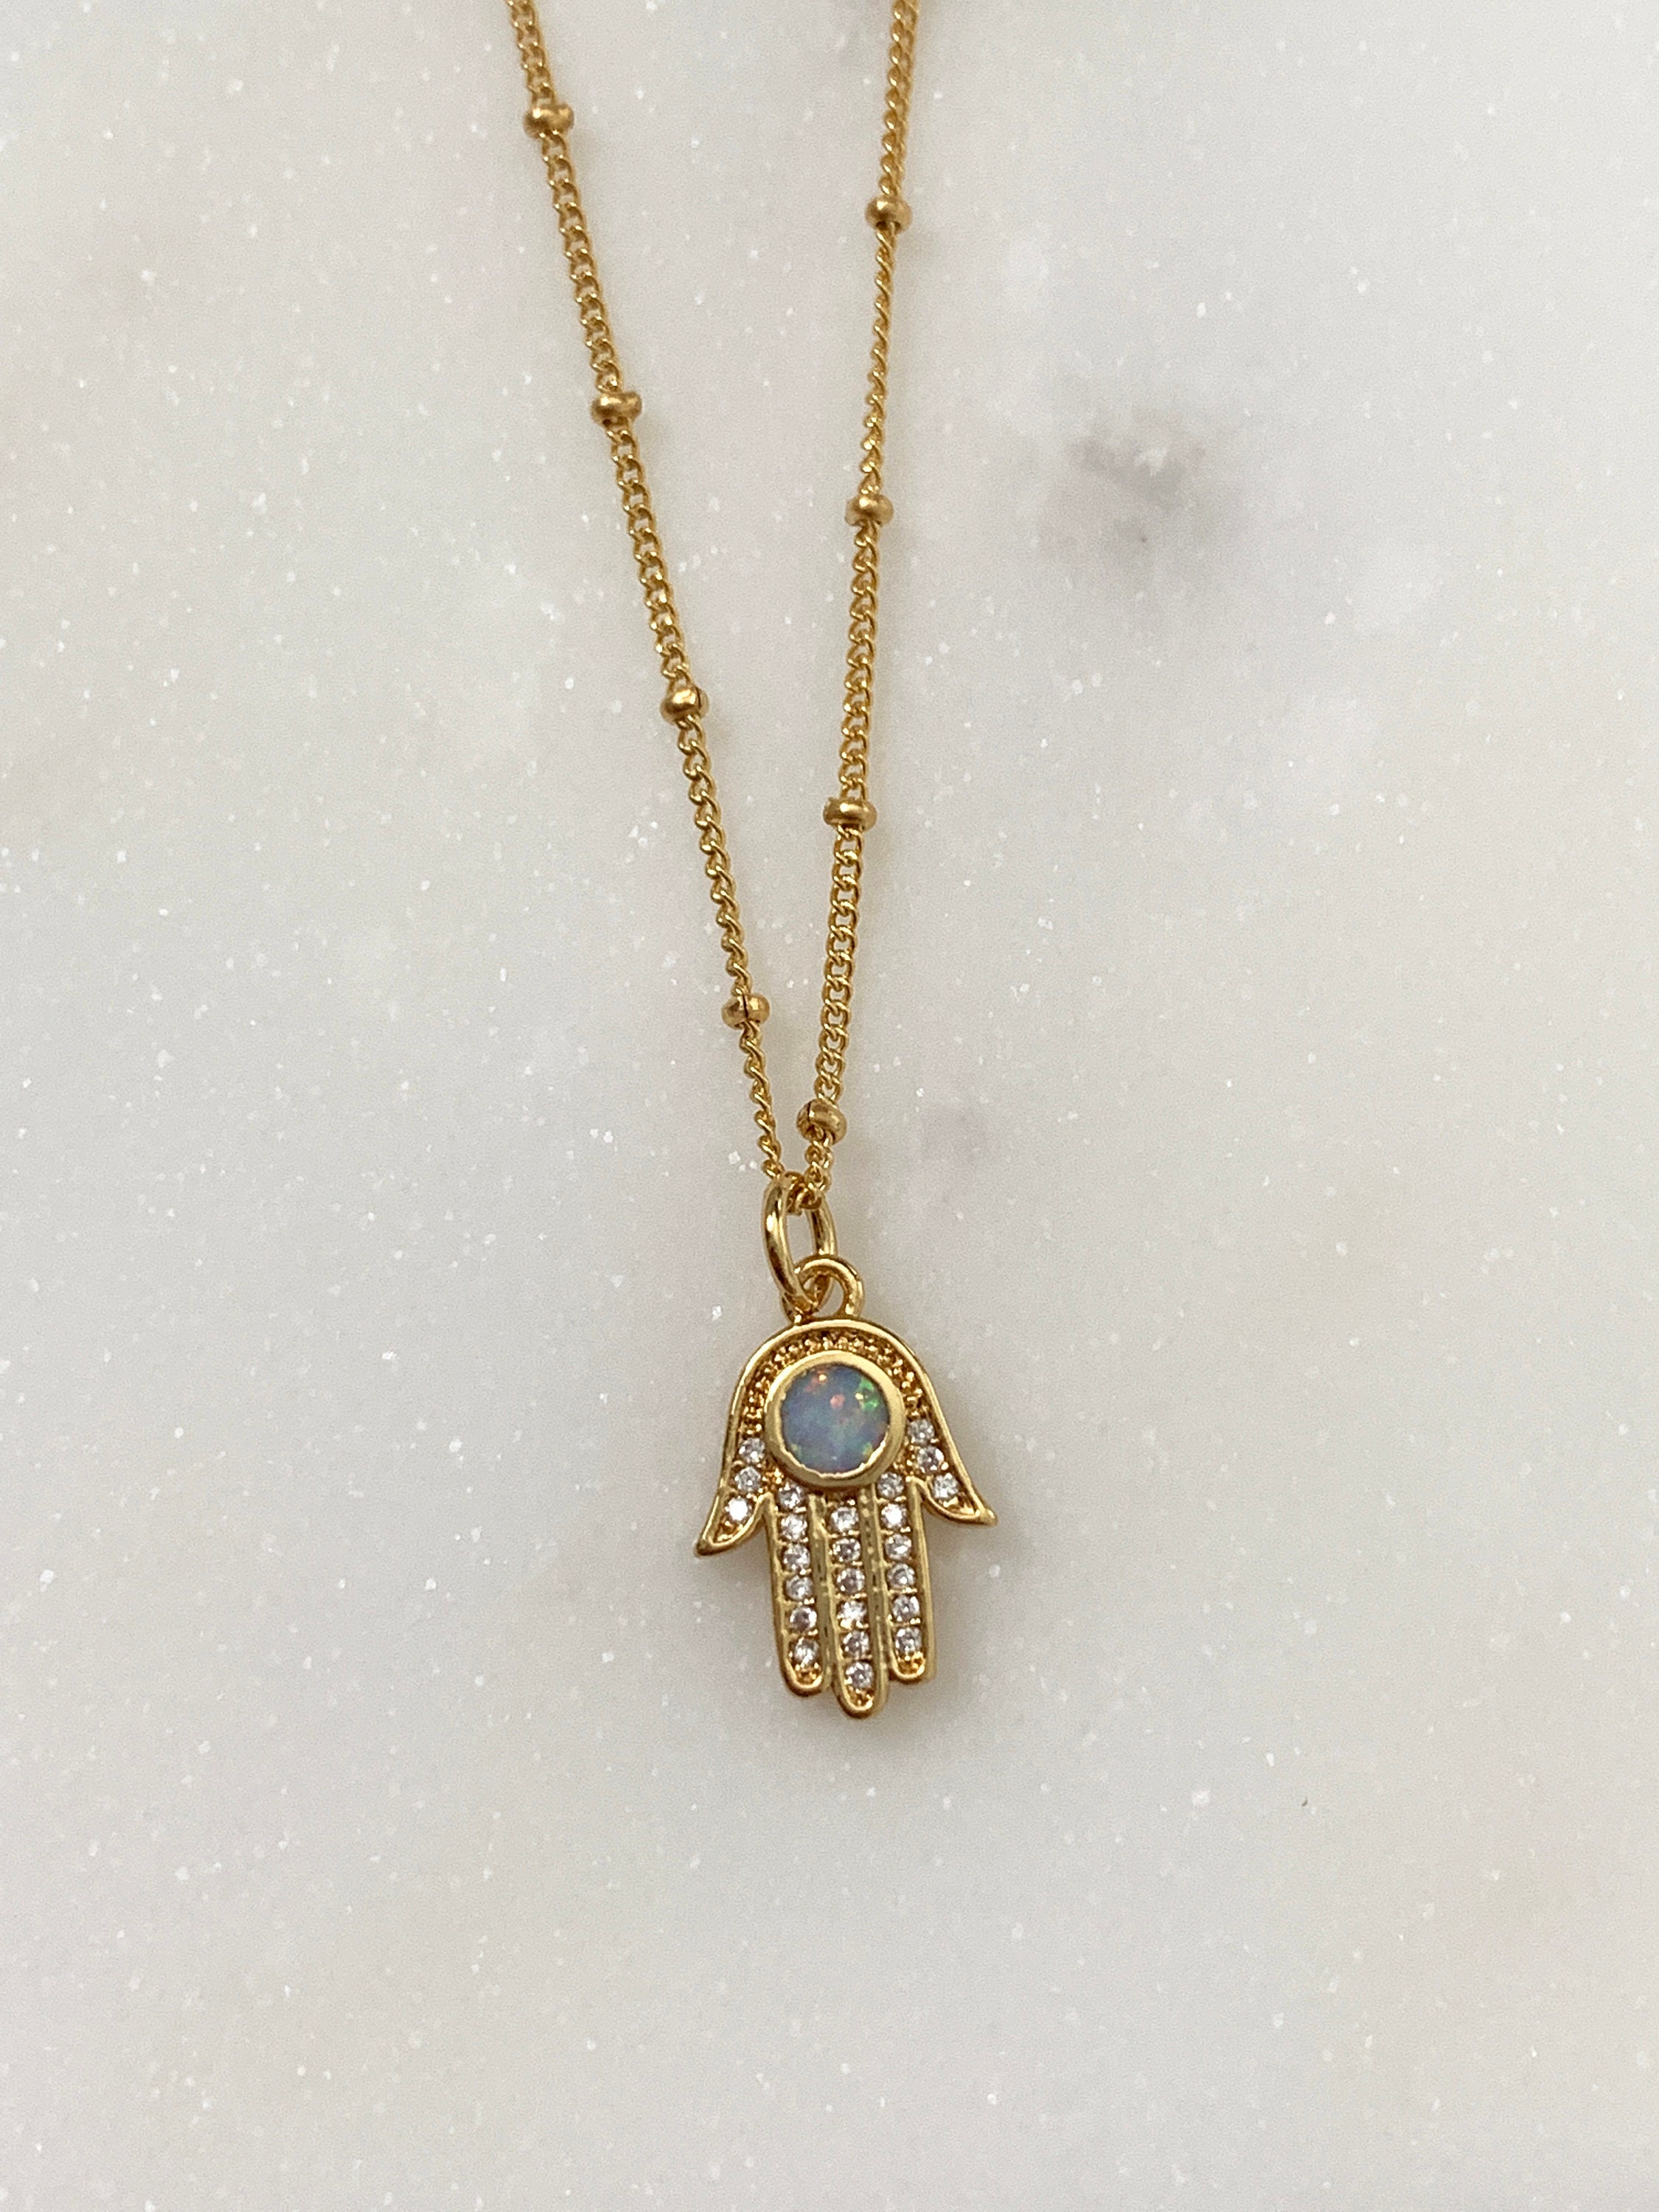 14k Gold Filled Hamsa Opal Necklace the Hand of Fatima | Etsy